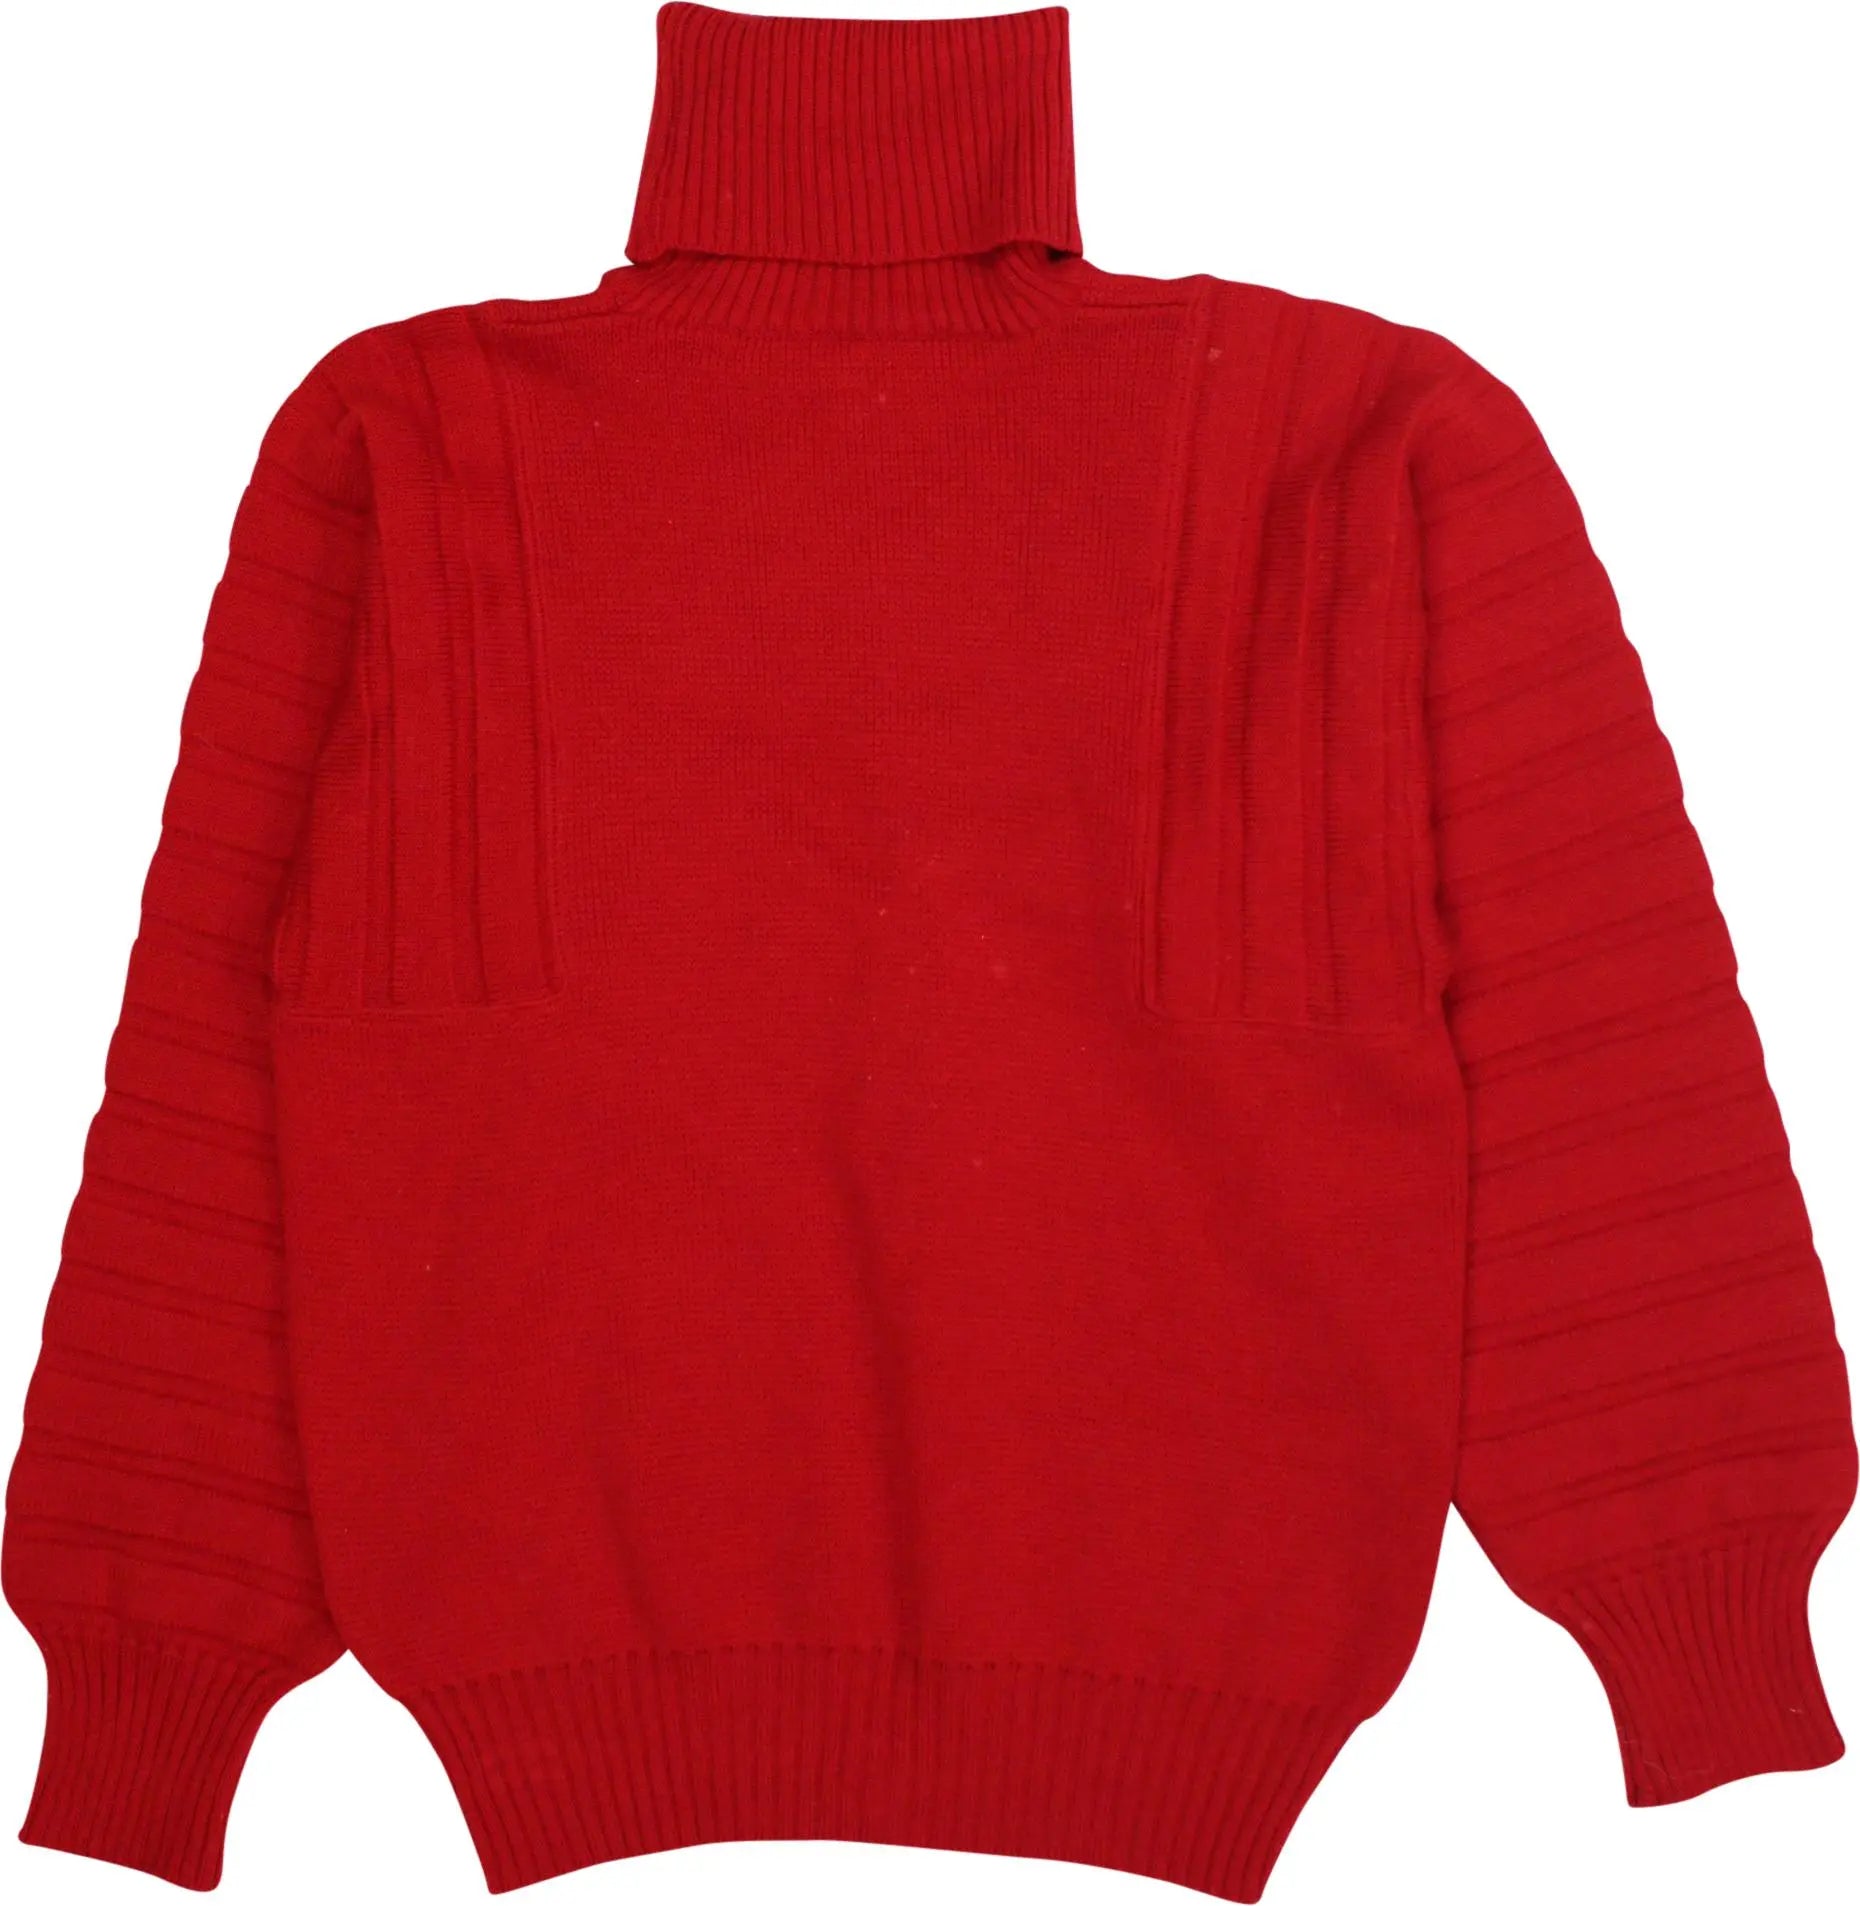 Playboy - Wool Knitted Turtleneck Jumper by Playboy- ThriftTale.com - Vintage and second handclothing